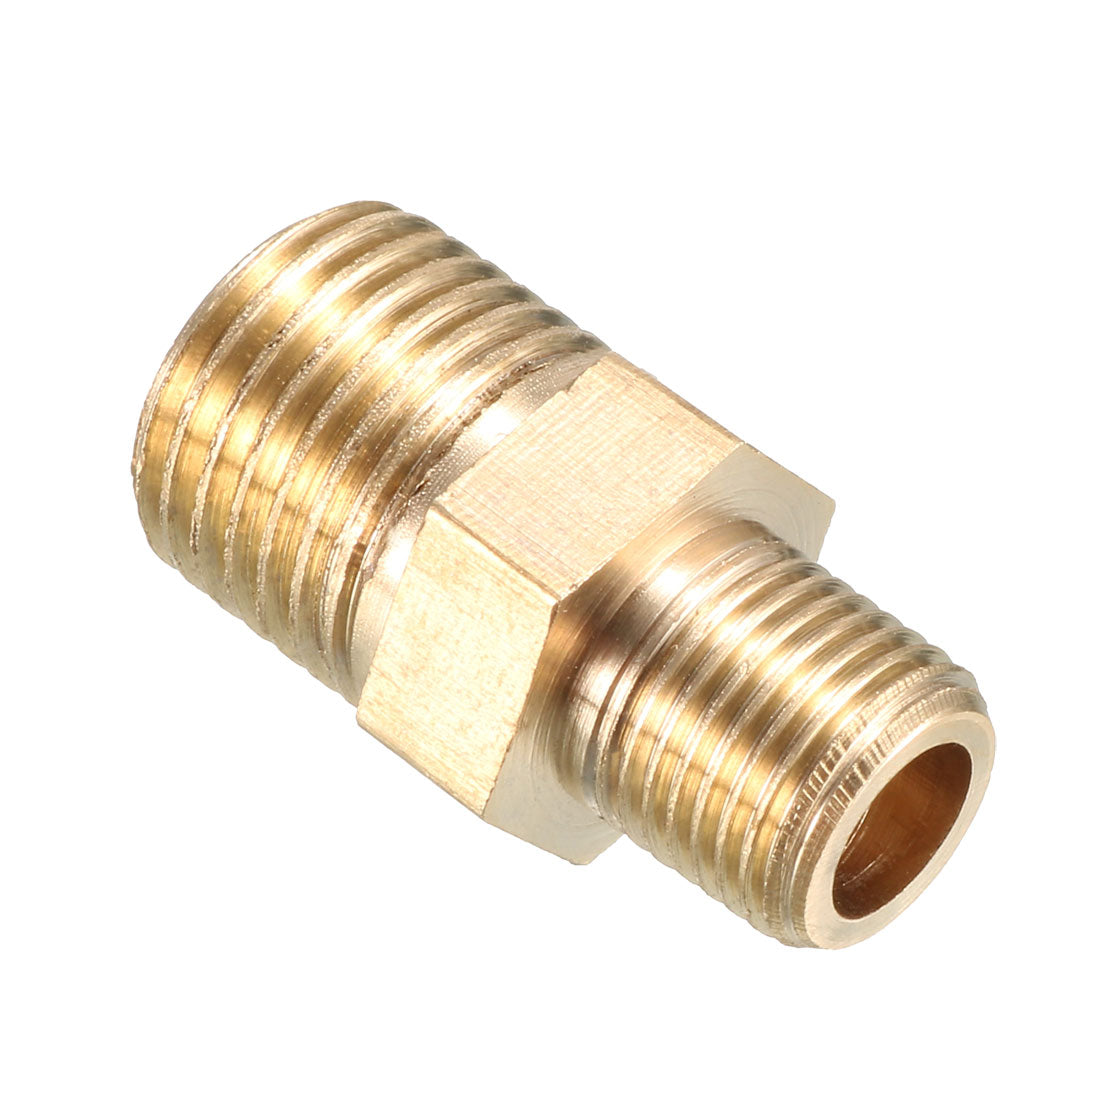 uxcell Uxcell Brass Pipe Fitting Reducing Hex Bushing 1/4 BSP Male x 1/8 BSP Male Adapter 5pcs